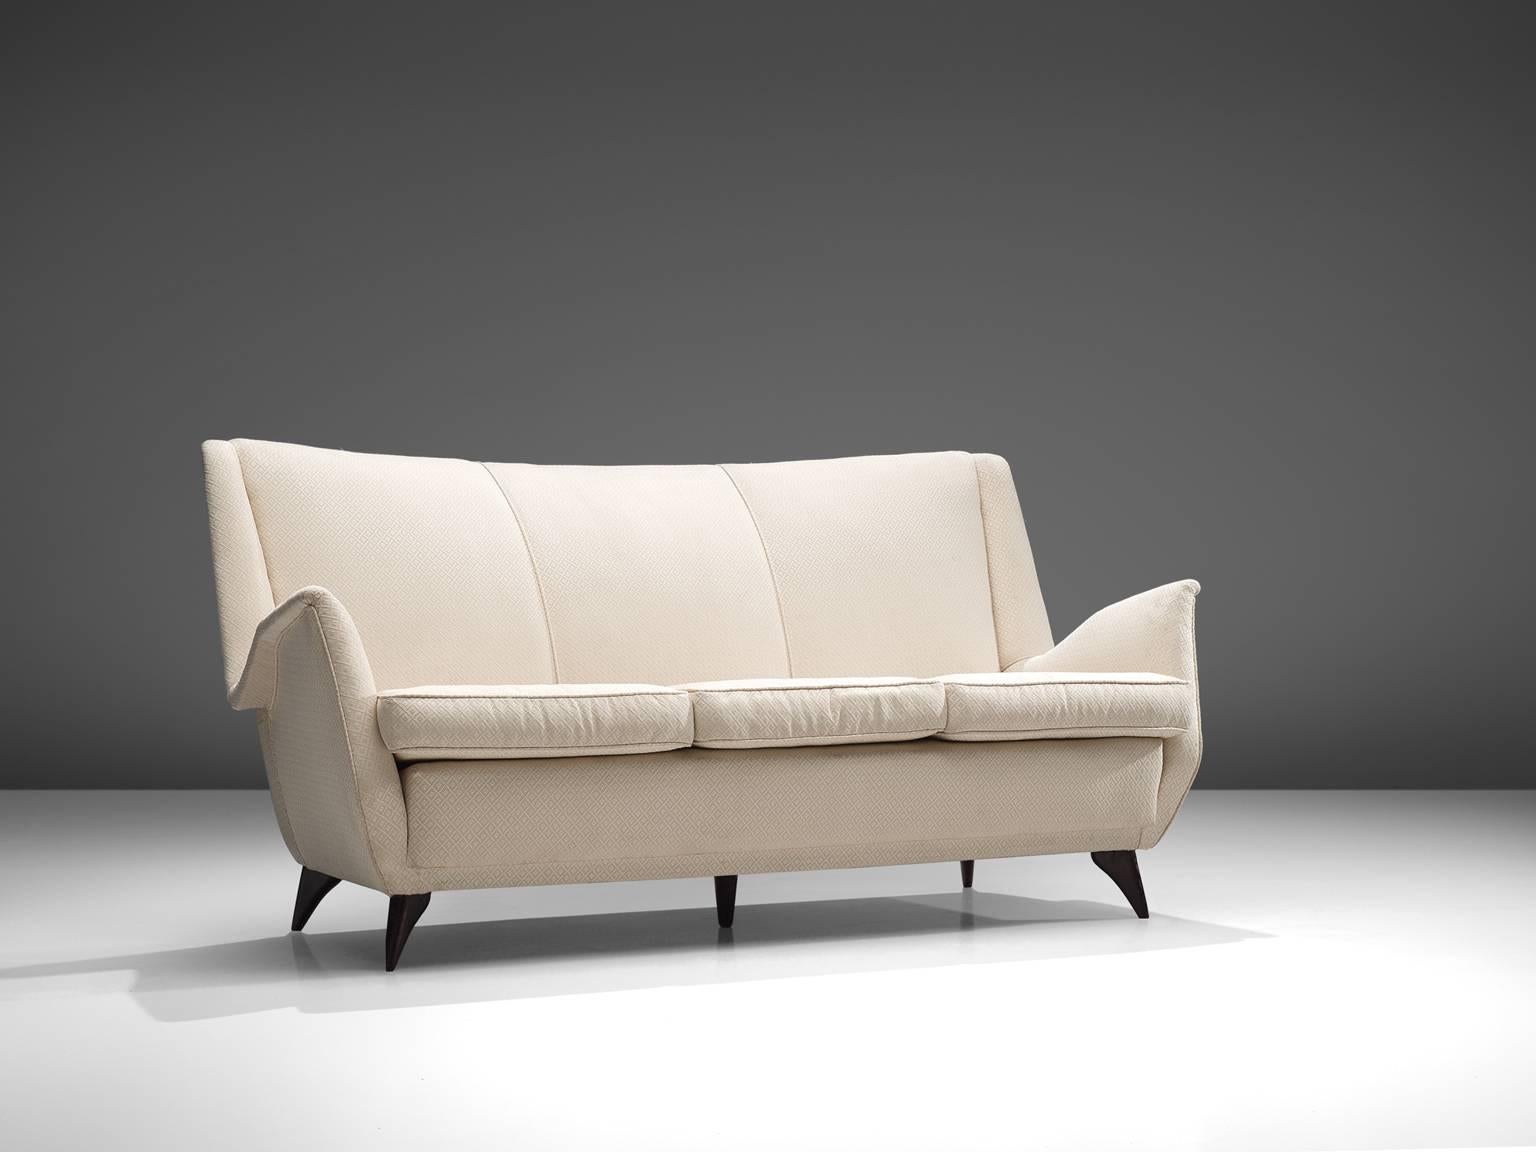 Sofa, wood and white fabric, Italy, 1950s.

Three-seat Italian sofa in off-white pattern fabric. This sofa shows beautiful and elegant lines. The wide seating is accomplished with nicely pointed armrests that give this settee an airy, frivolous